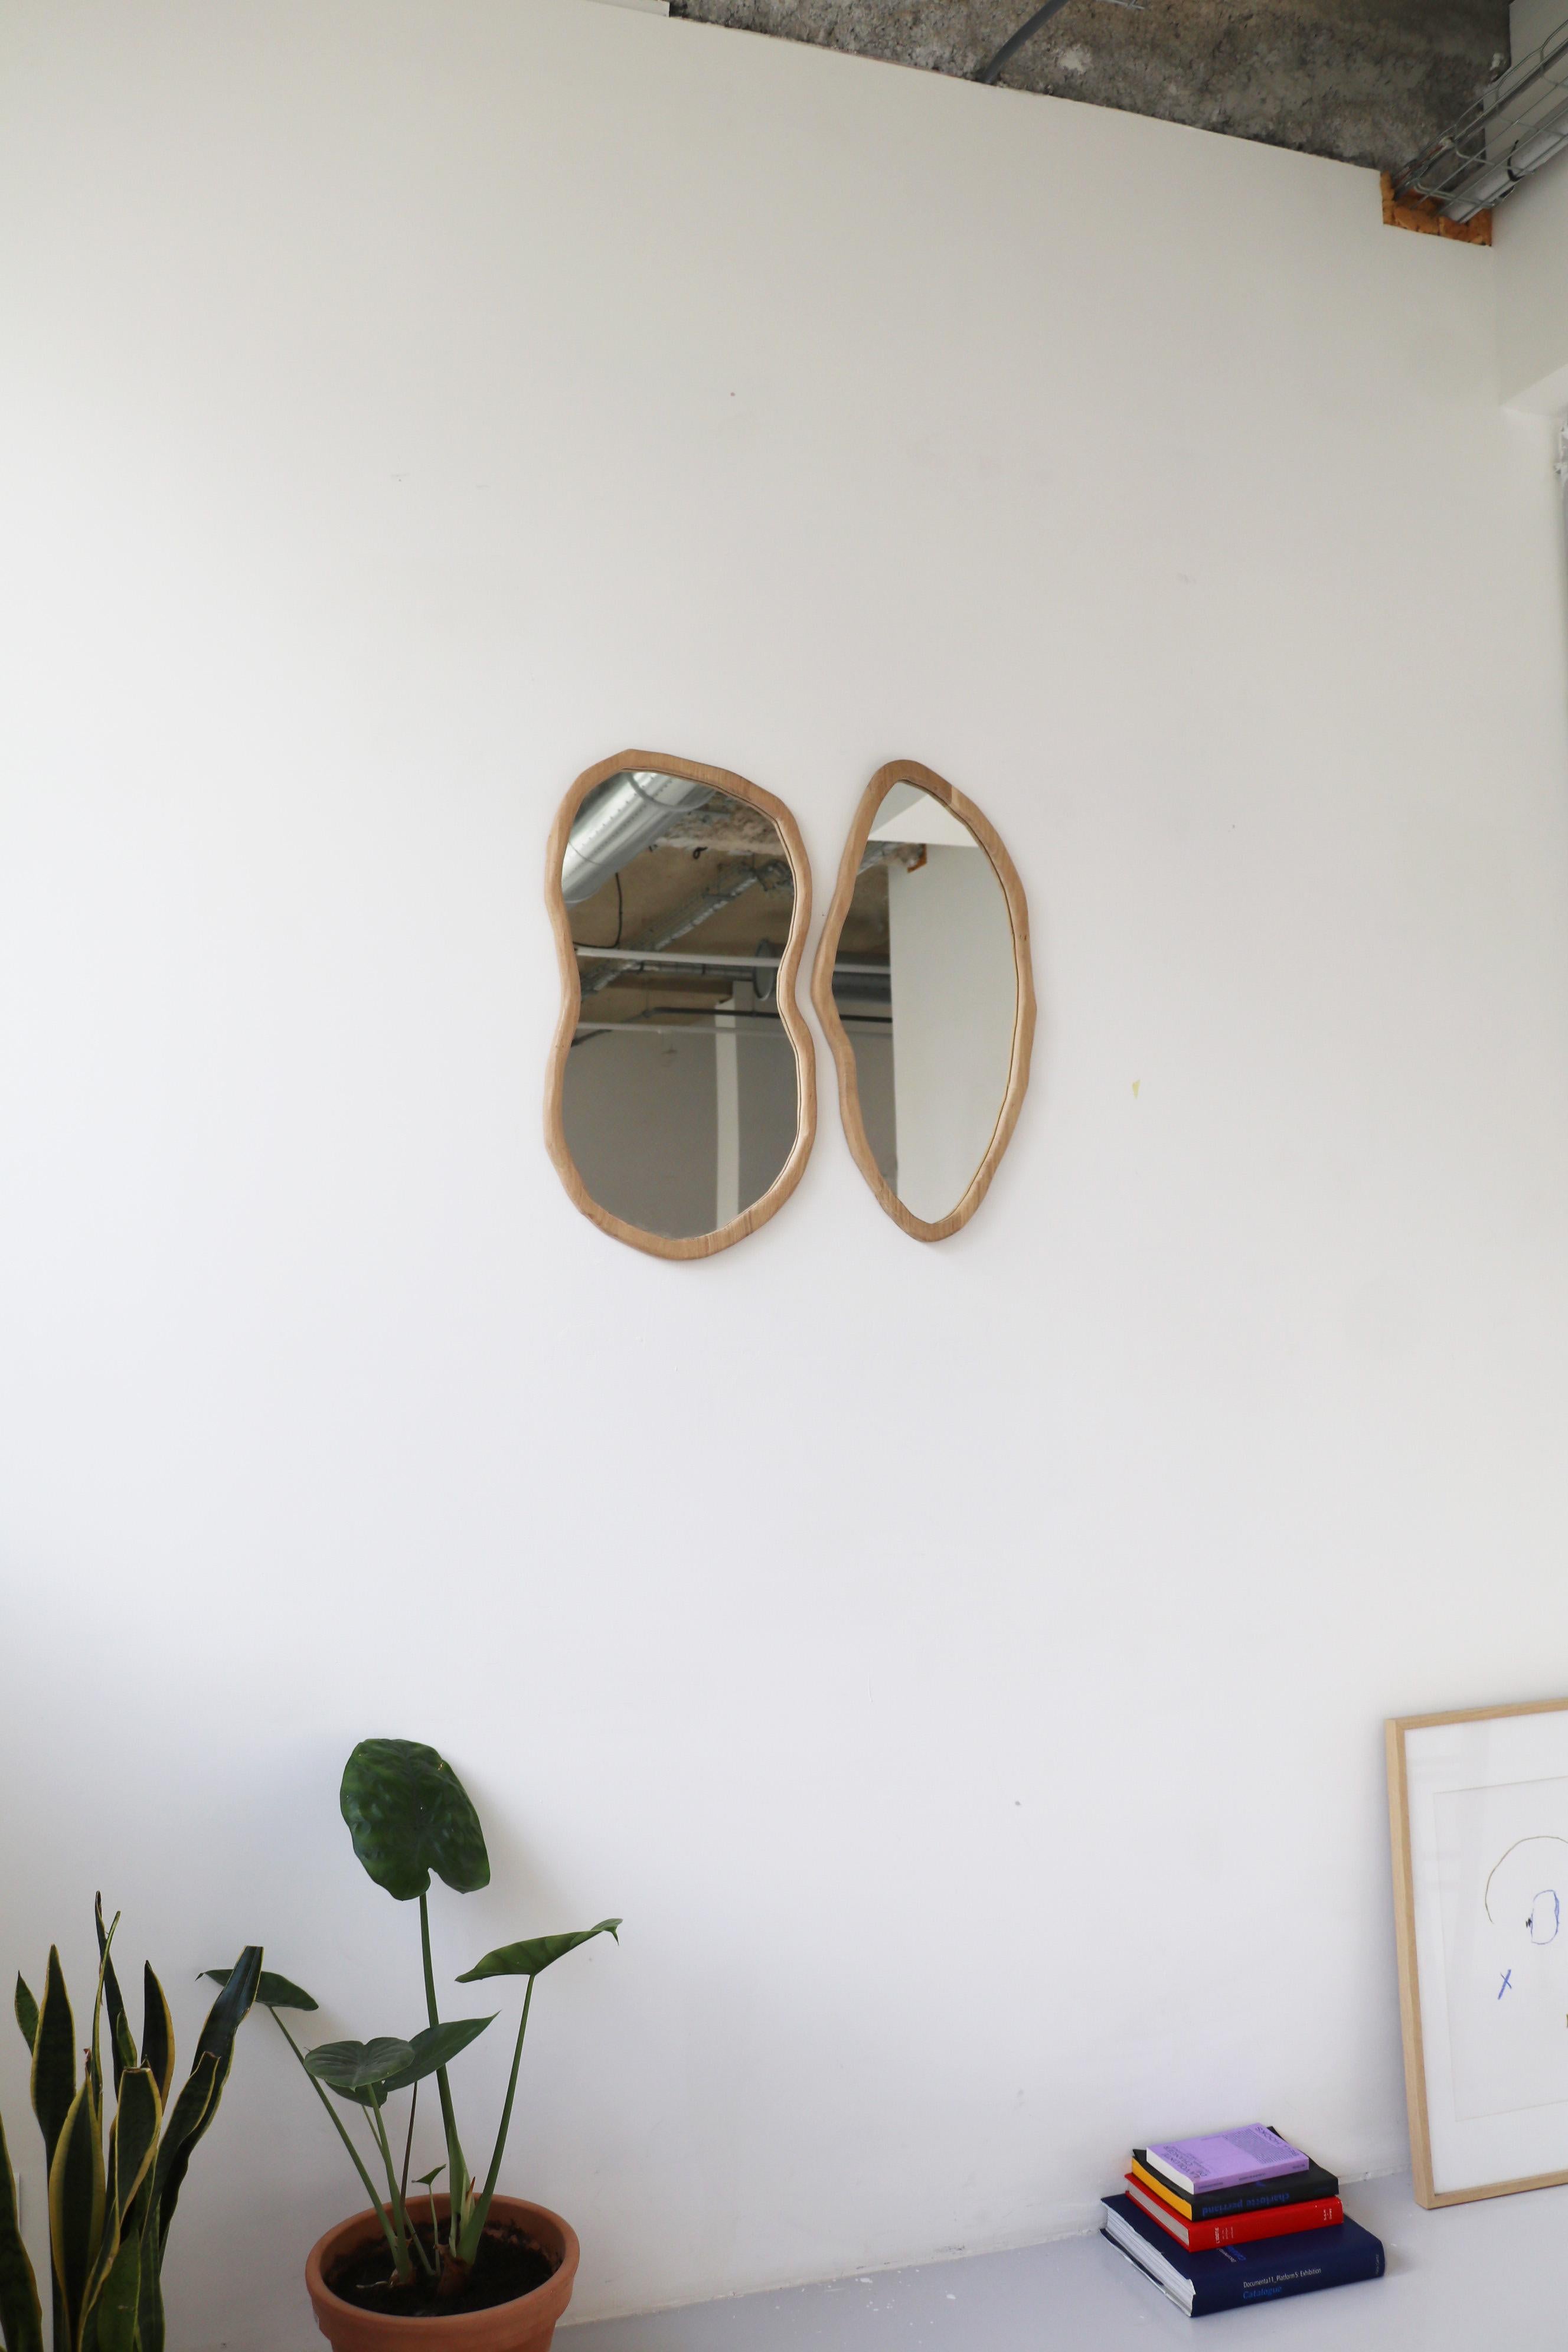 Set of 2 Rencontre large mirrors by Alice Lahana Studio
Cut with a chisel, each model is unique.
Dimensions: 
Left: 60 H x 45 cm
Right: 60 H x 37 cm
Materials: French Oak.

The Rencontre mirror duo is handmade in Paris.
The mirrors can be